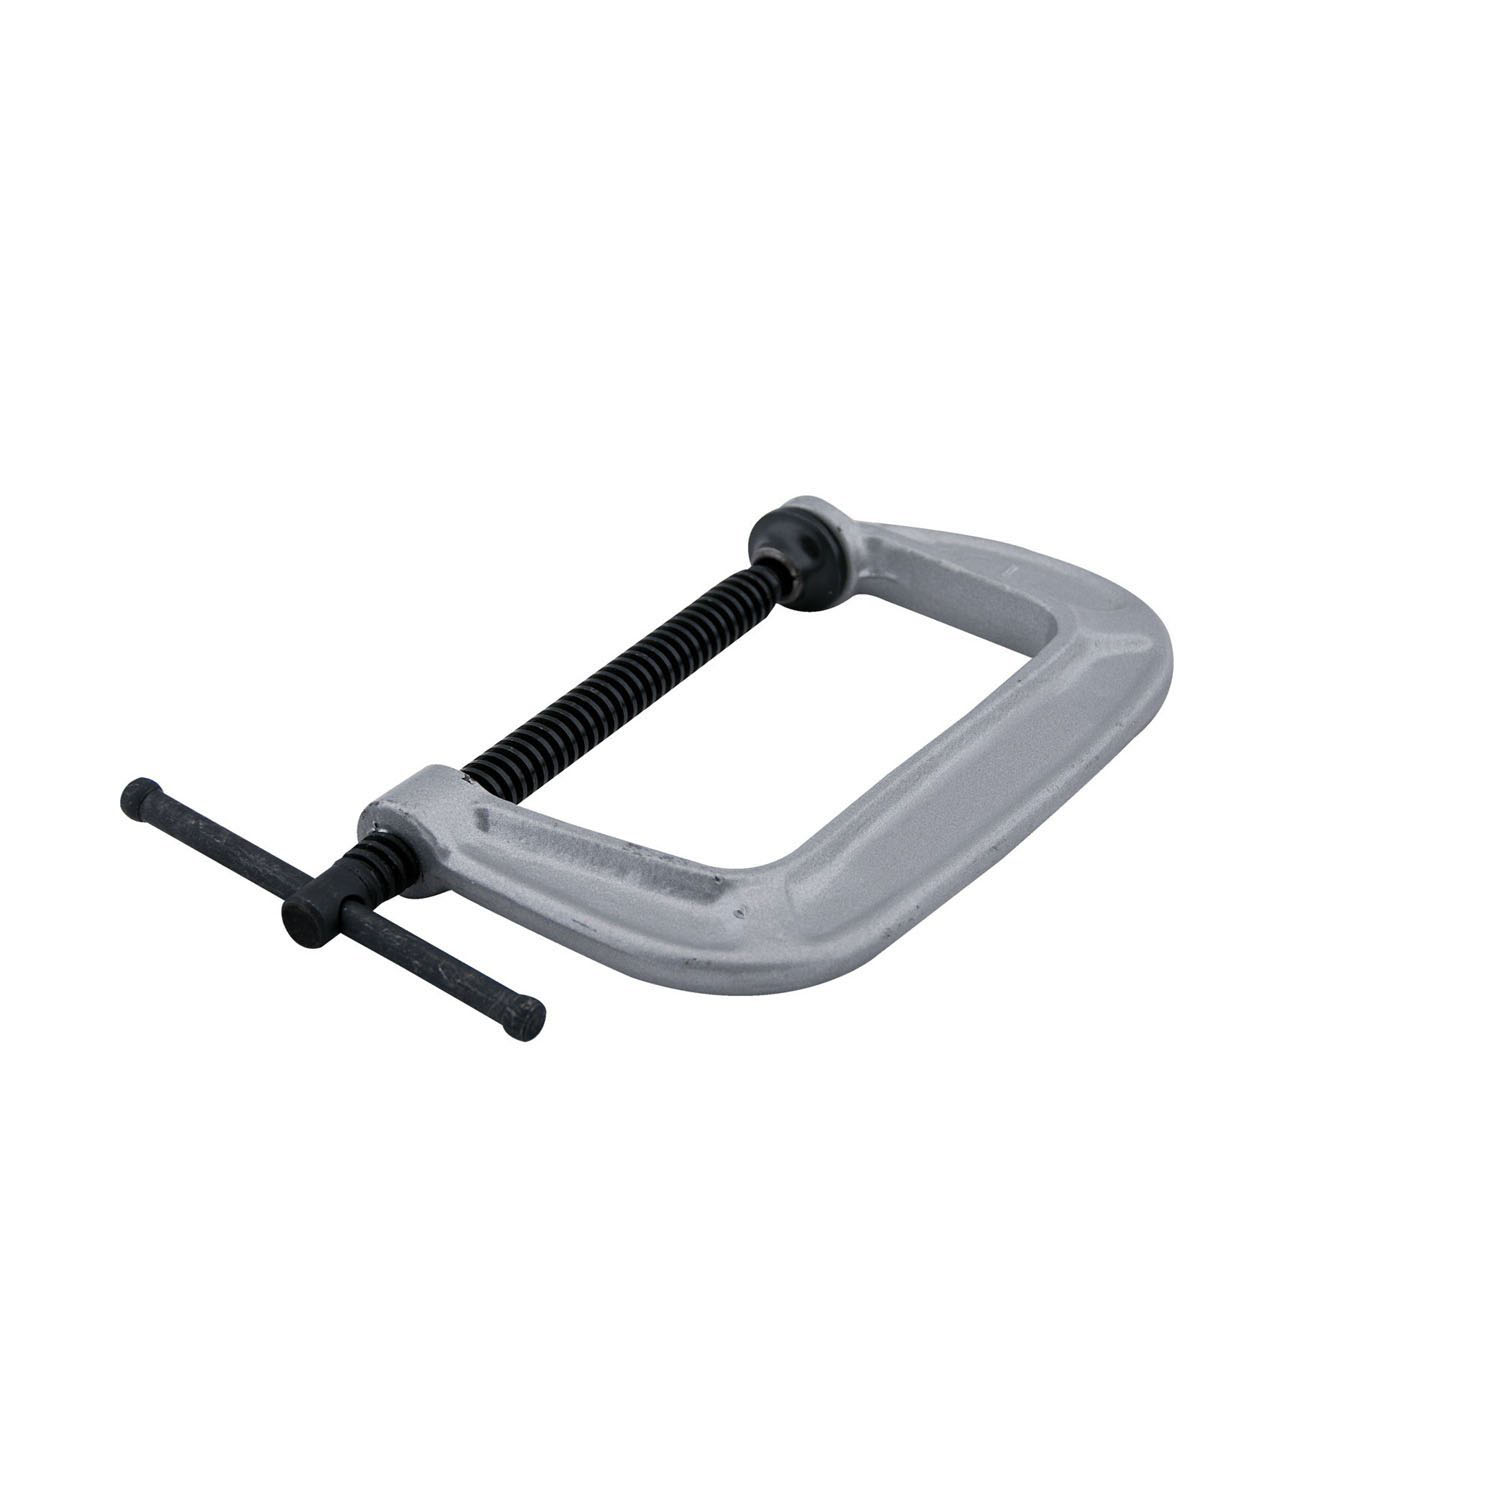 140 SERIES C-CLAMP (MULTIPLE SIZES AVAILABLE)